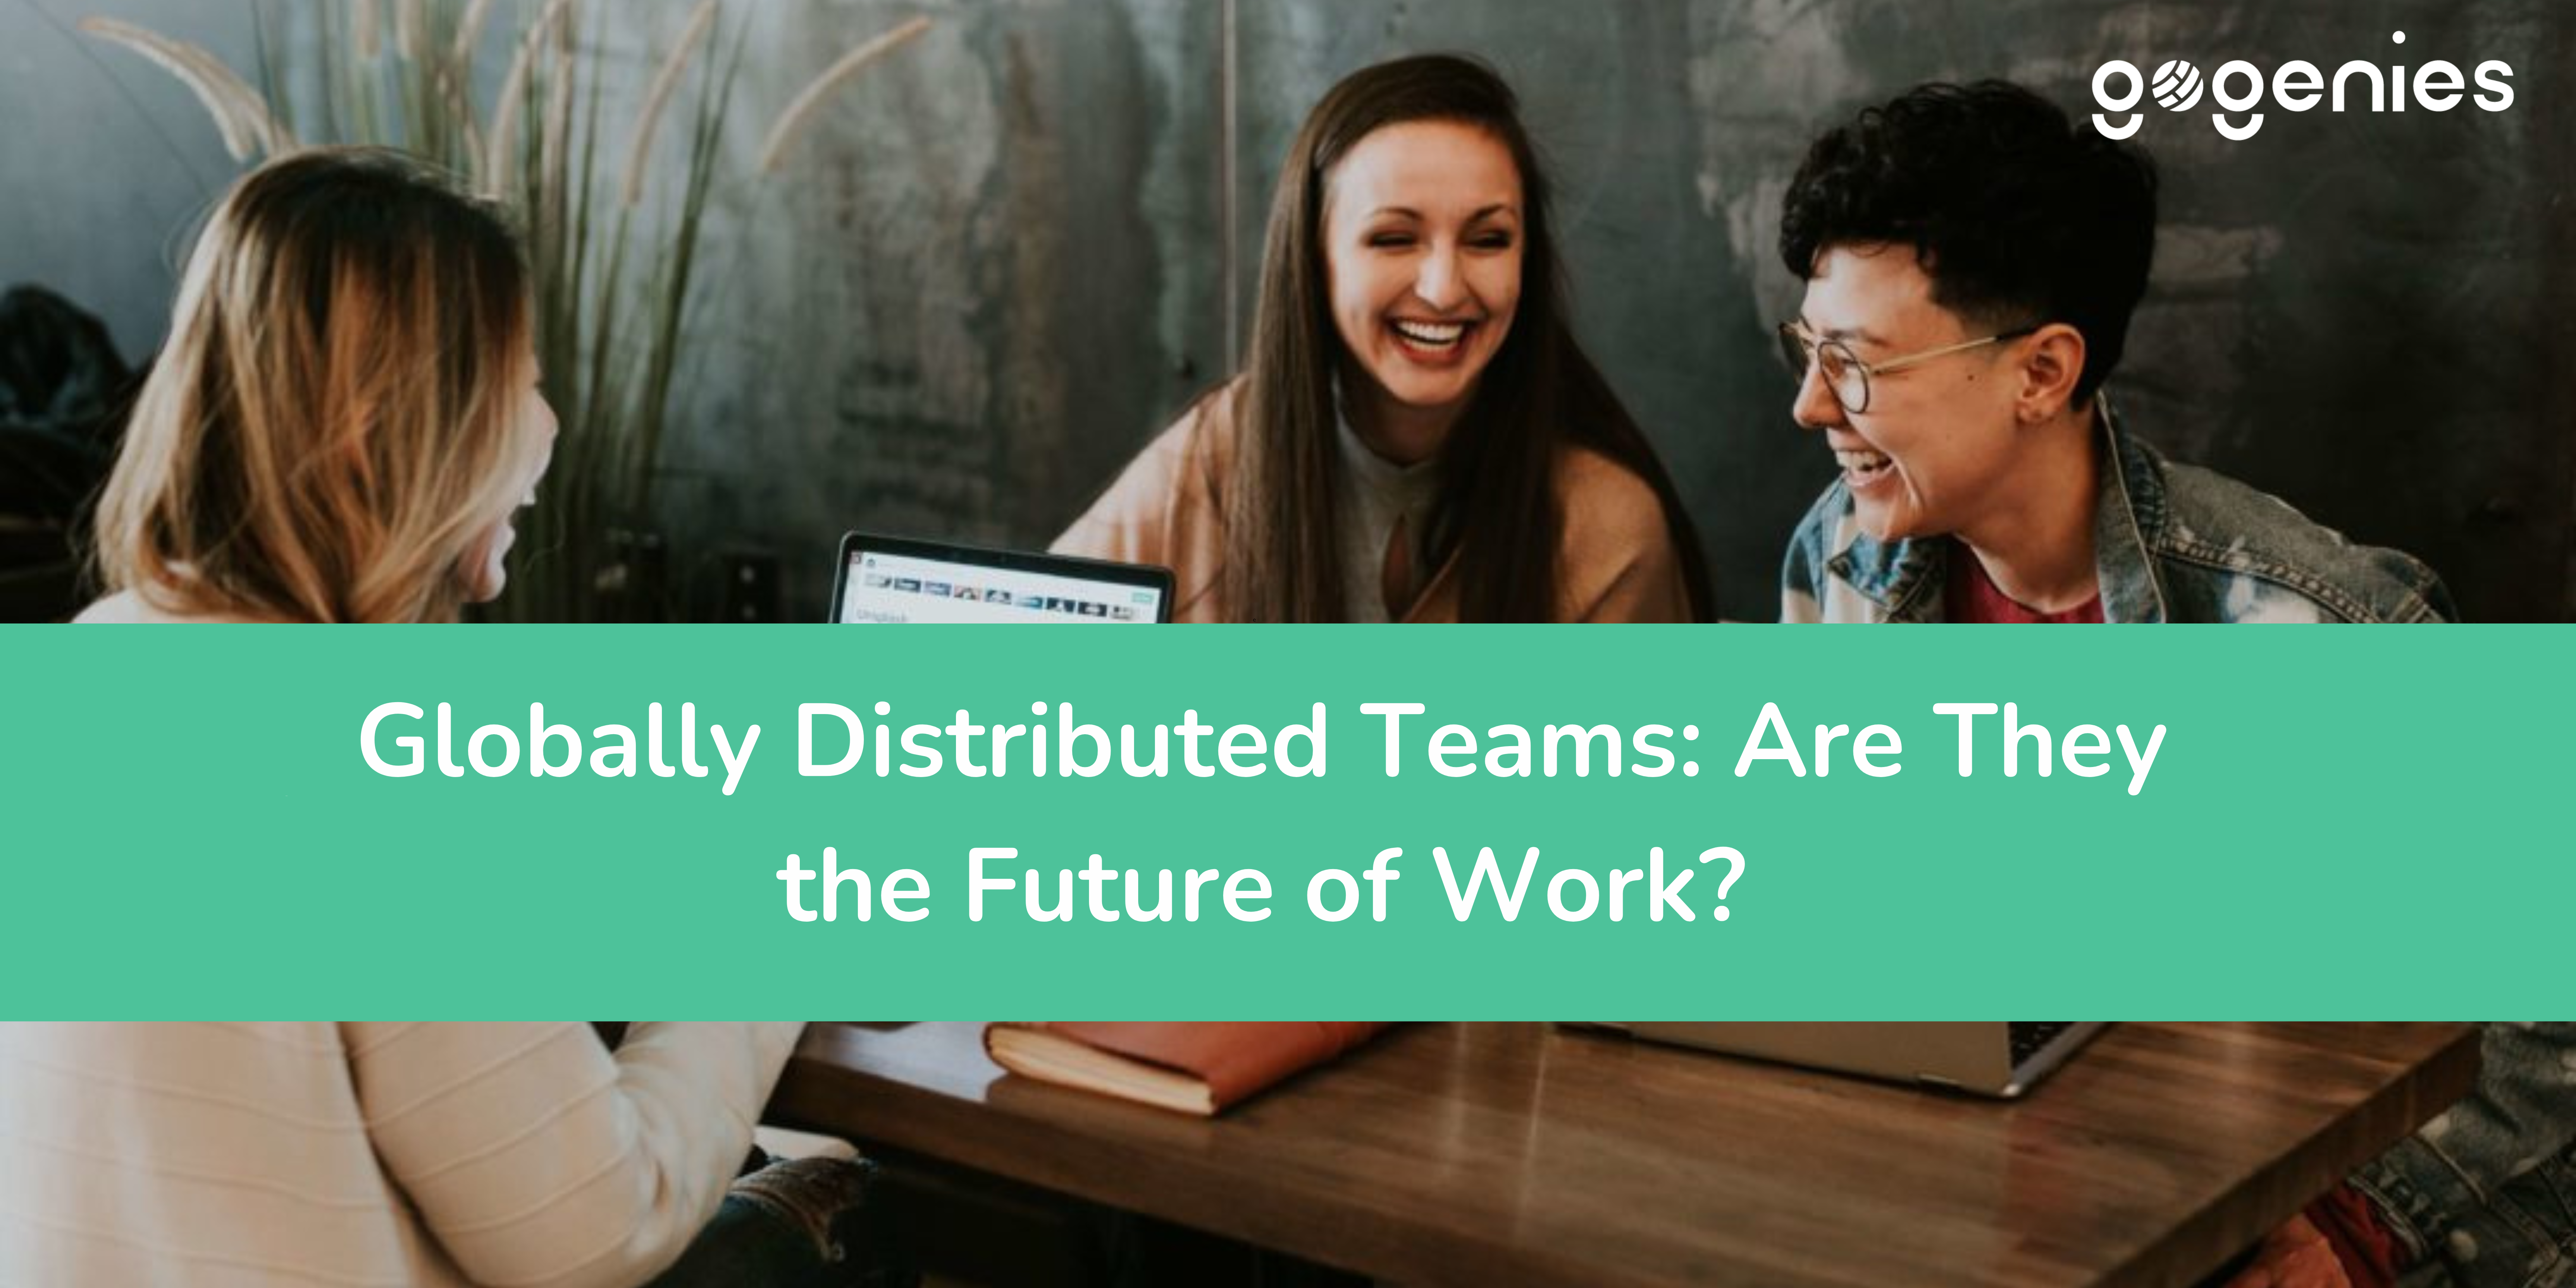 Globally Distributed Teams: Are They the Future of Work?